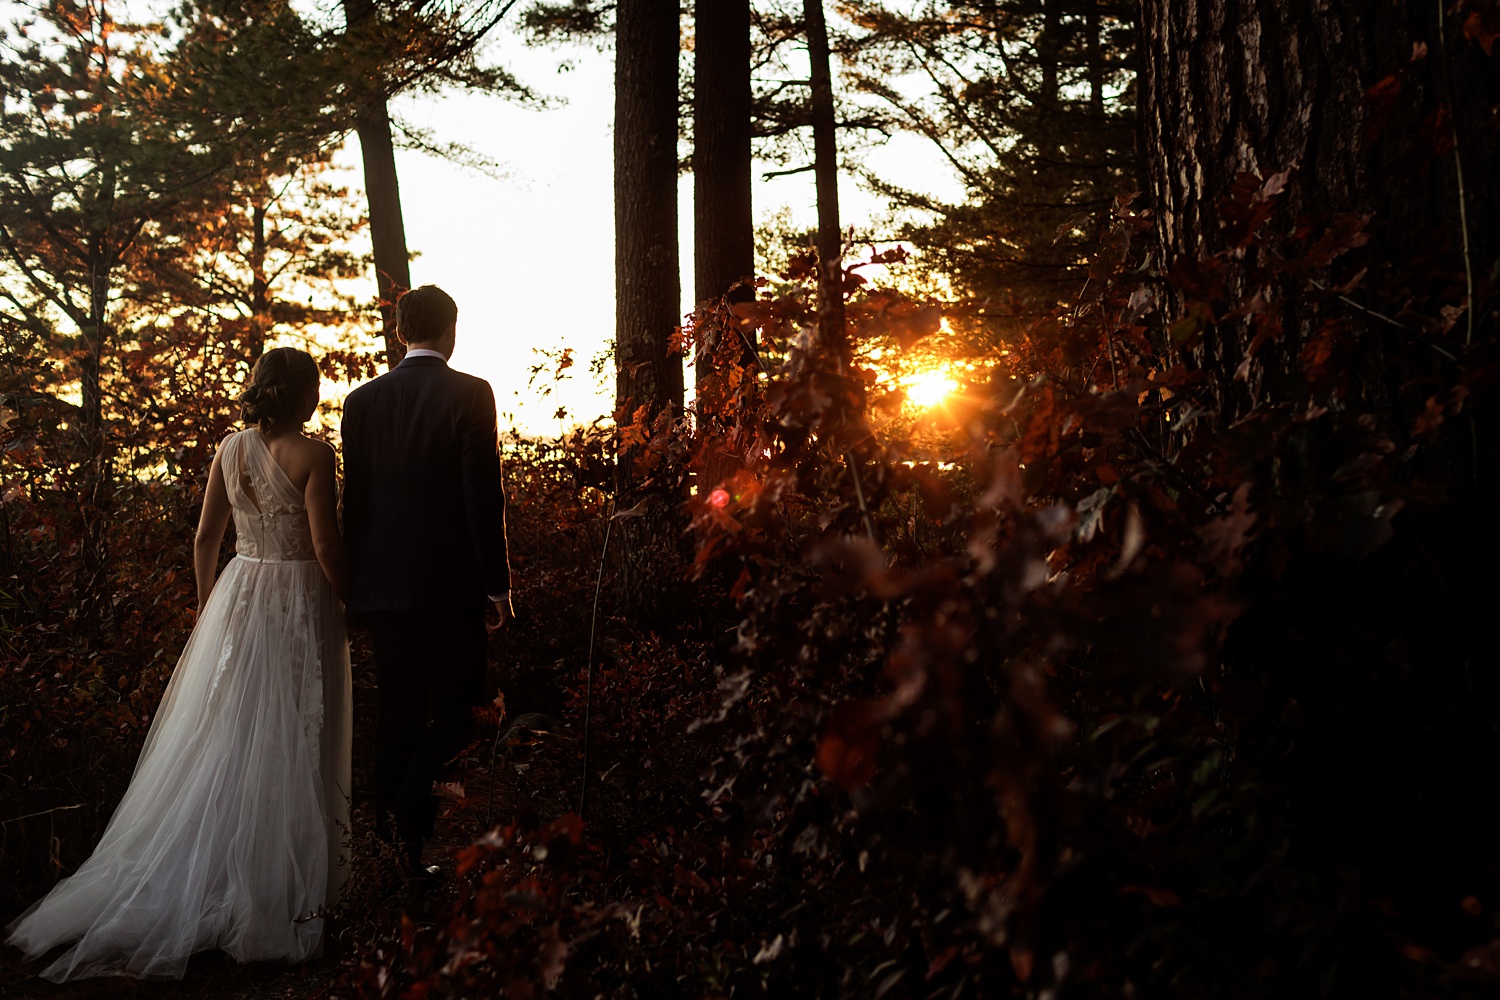 The sun sets as the couple walks through the woods at Maine's Migis Lodge Resort